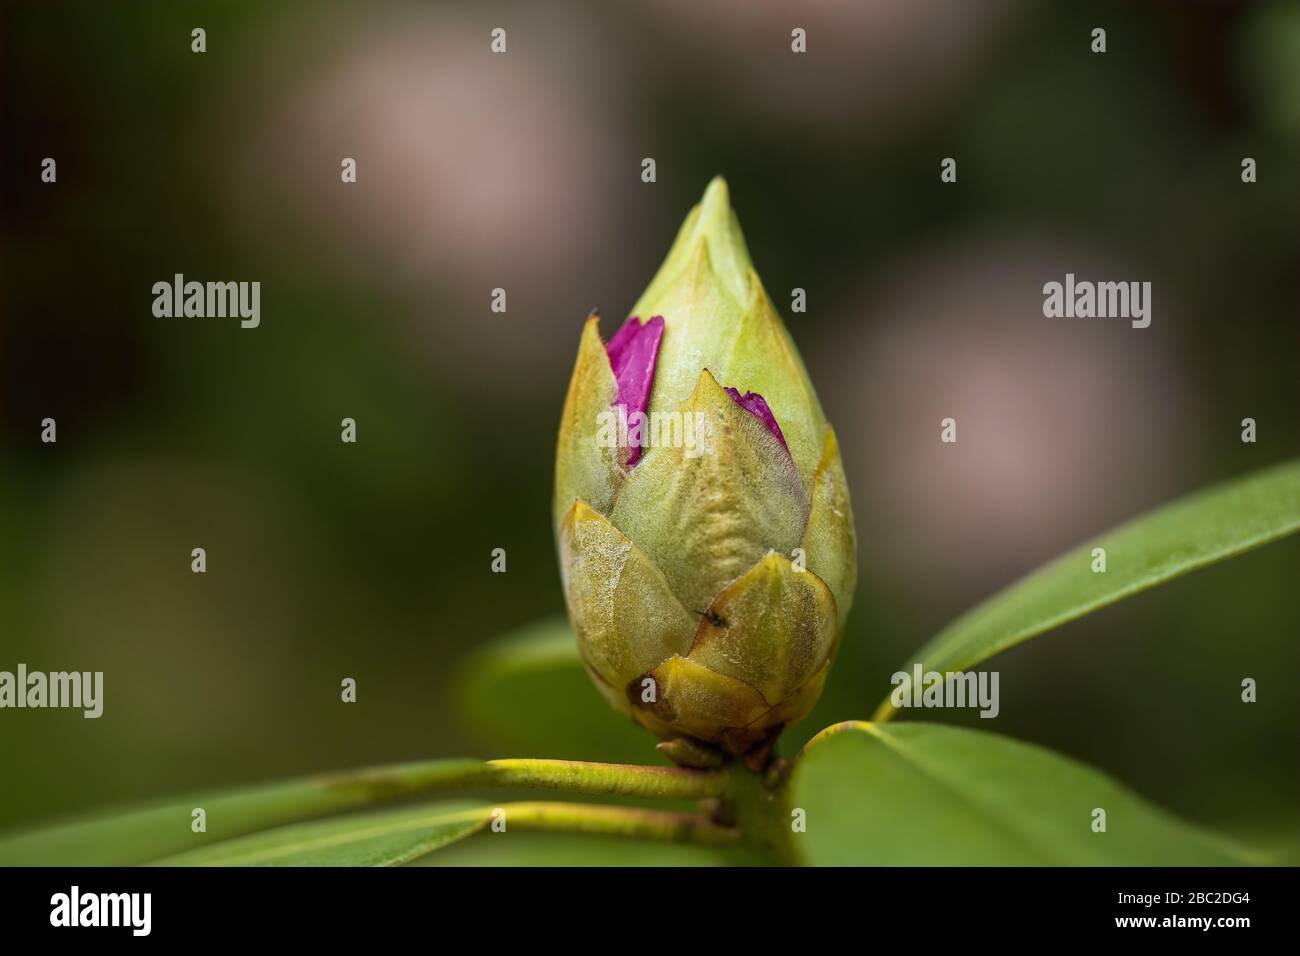 Rhododendron buds is ready to bloom. Stock Photo